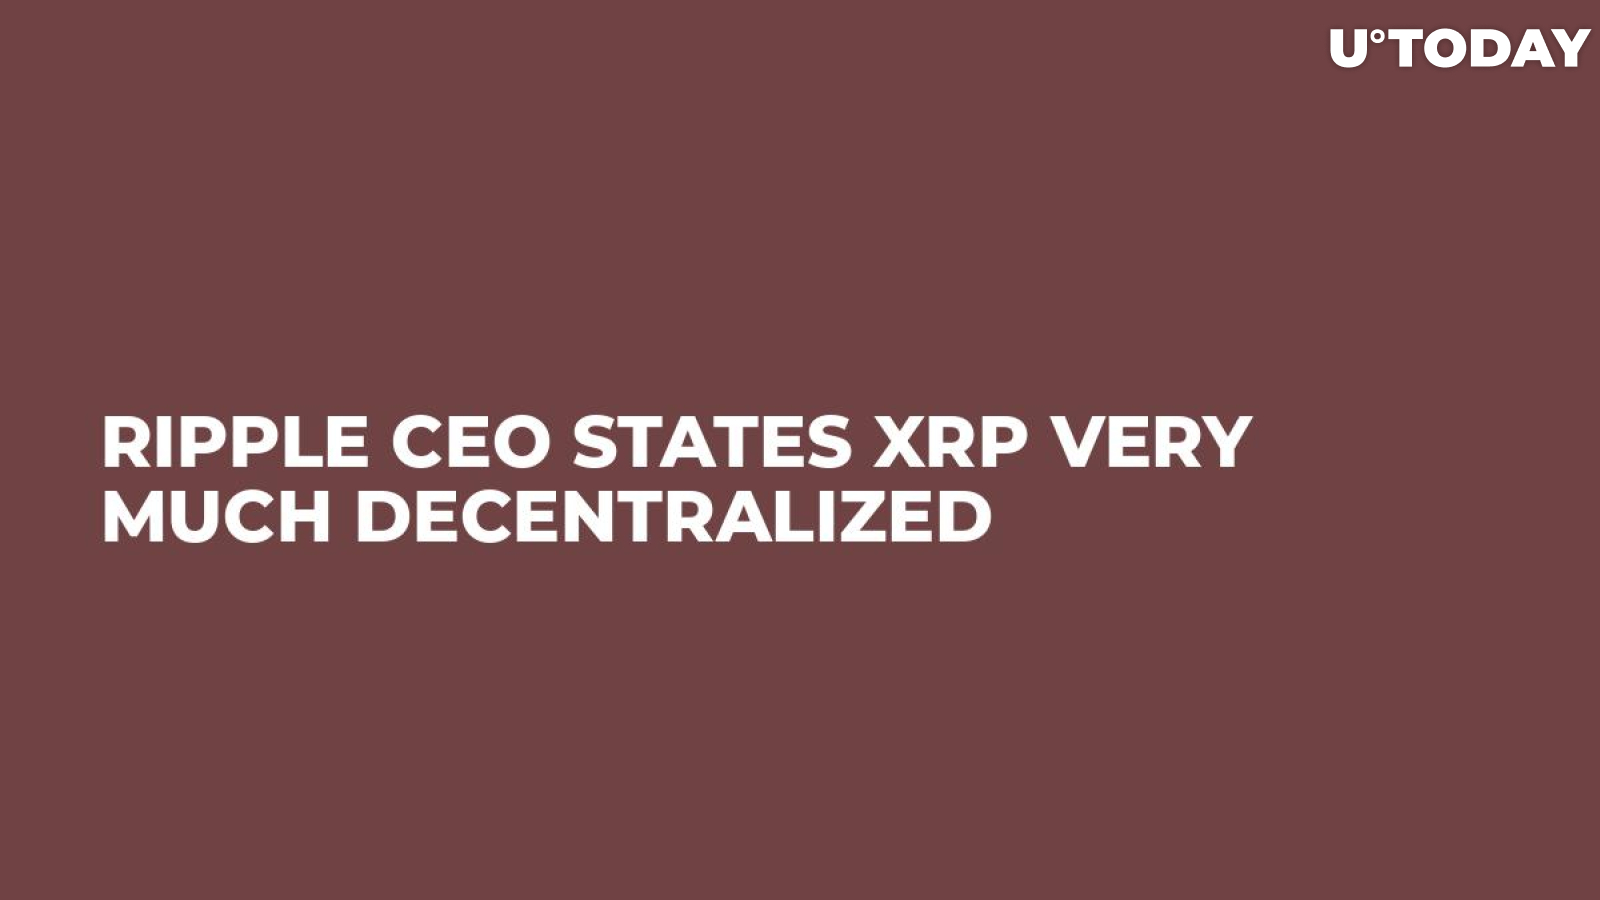 Ripple CEO States XRP Very Much Decentralized